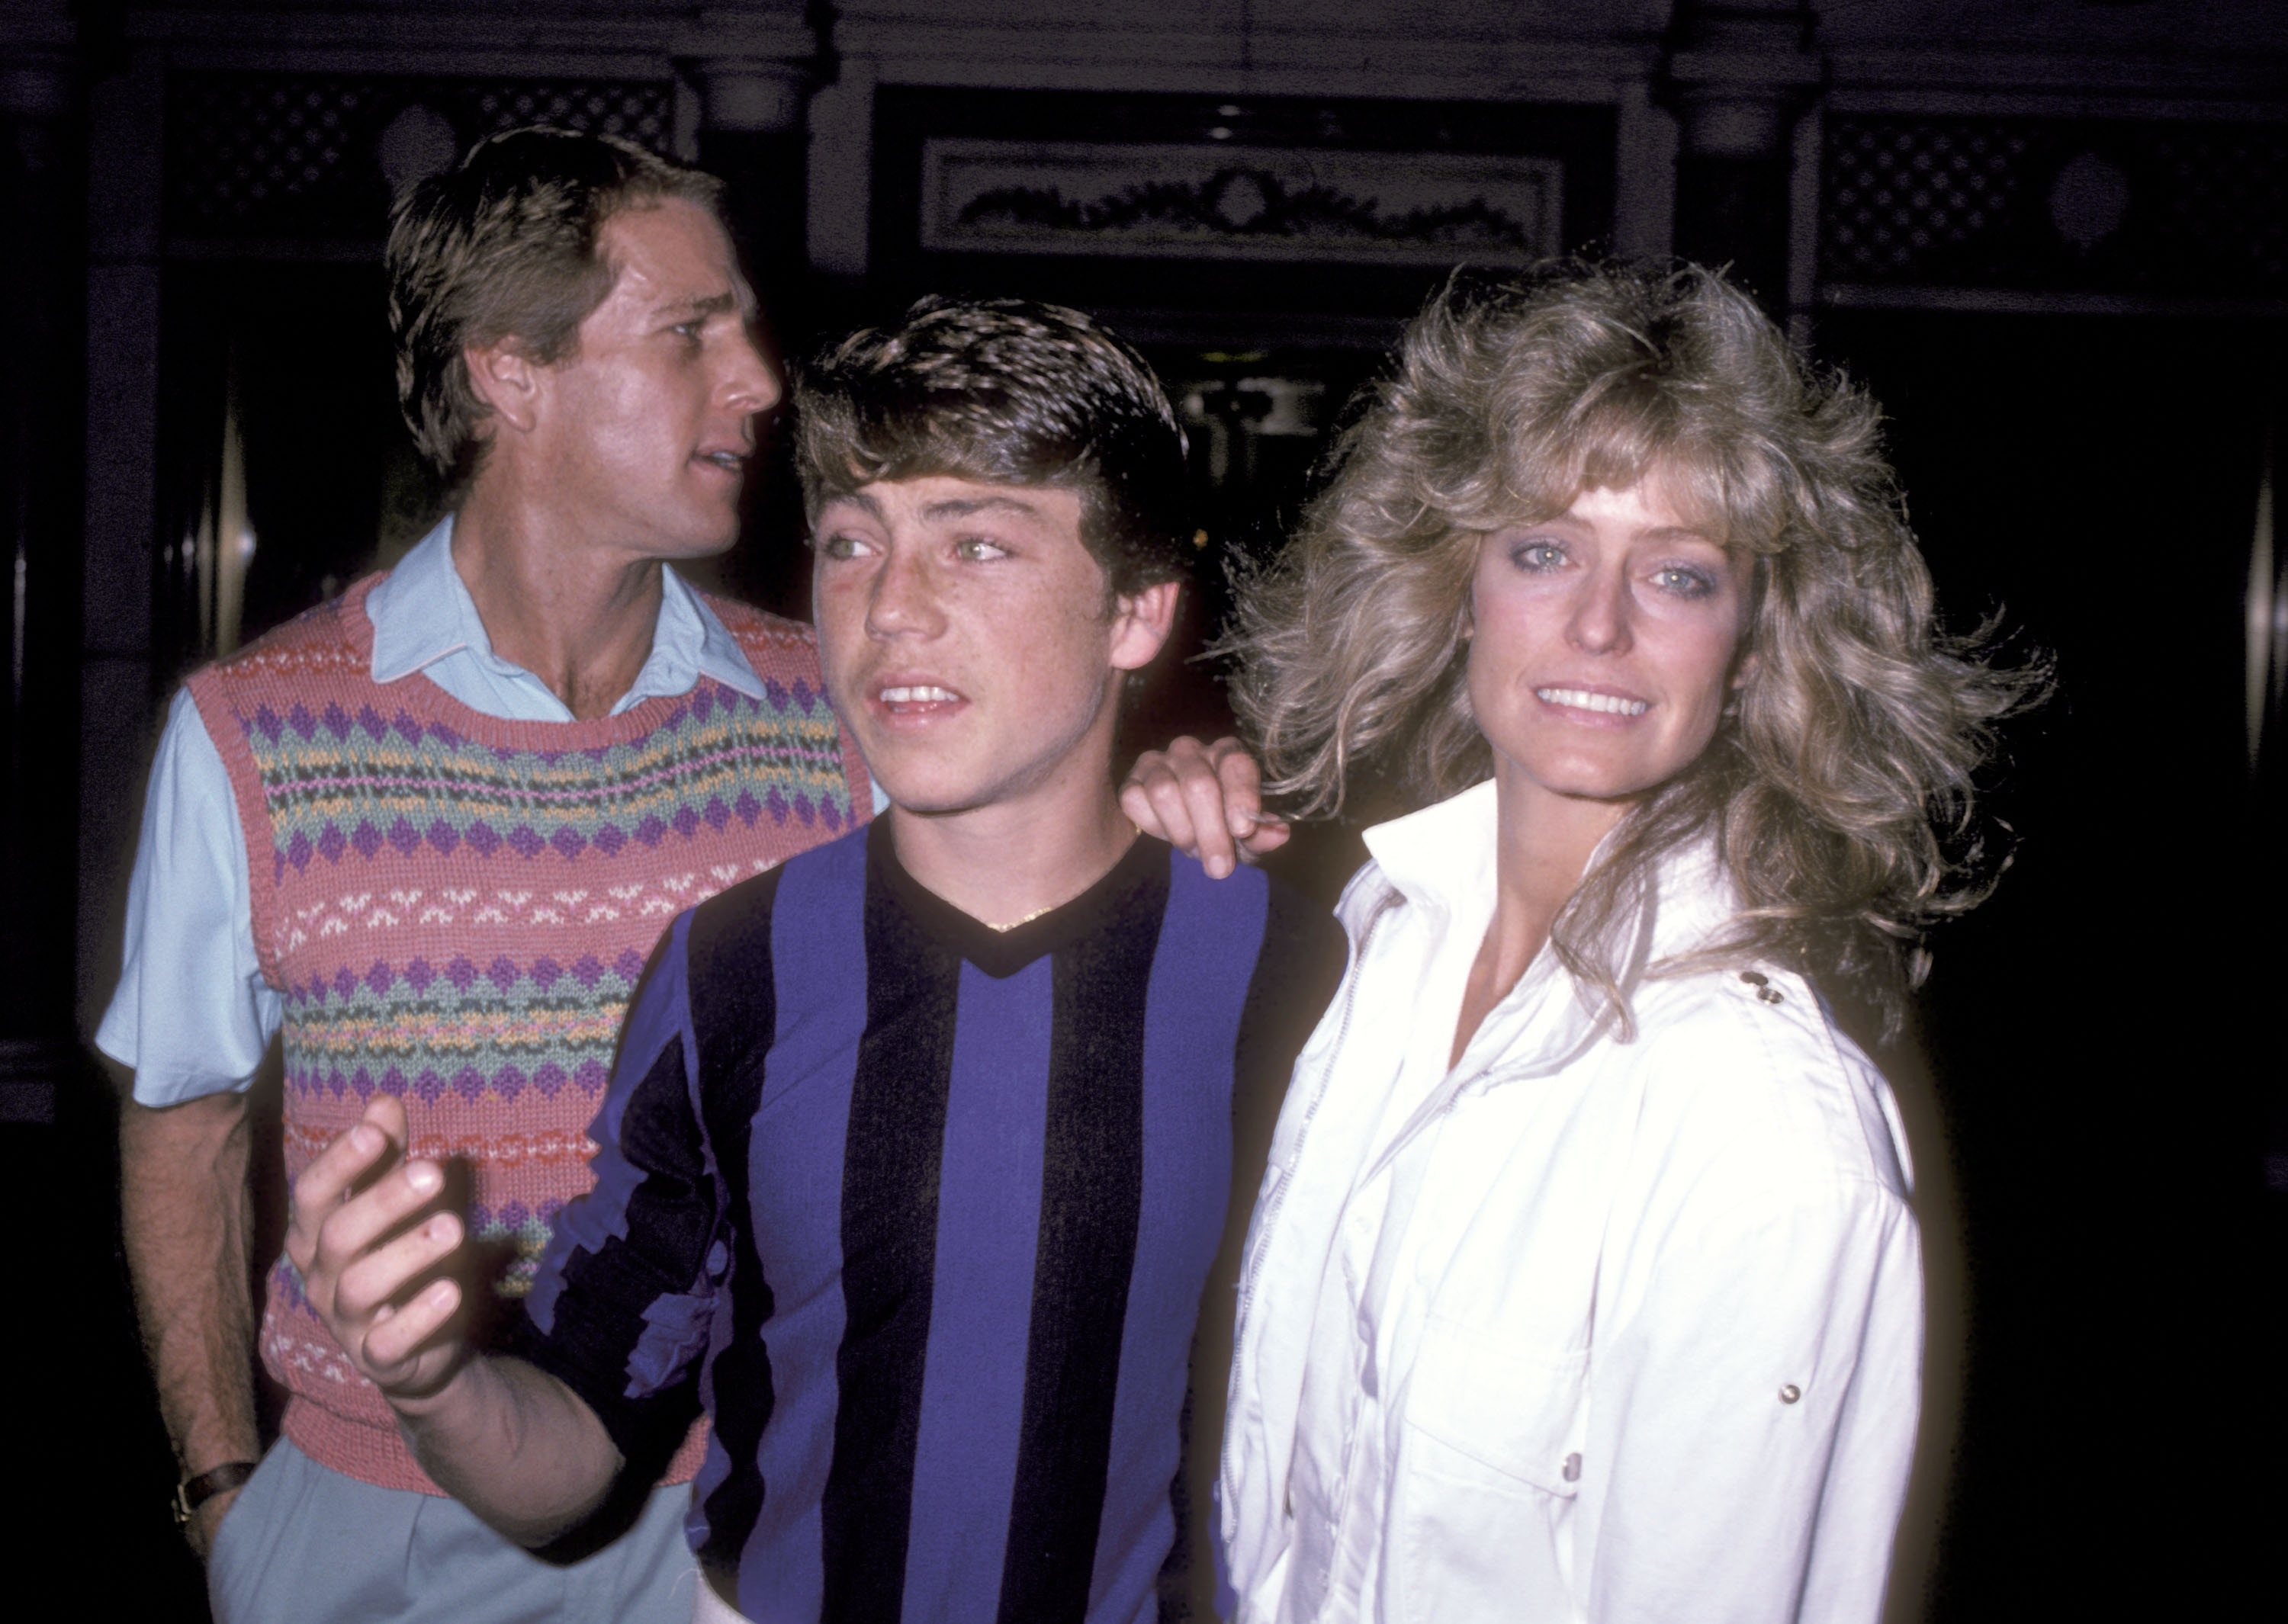 Griffin O'Neal and Farrah Fawcett in New York in 1982 | Source: Getty Images